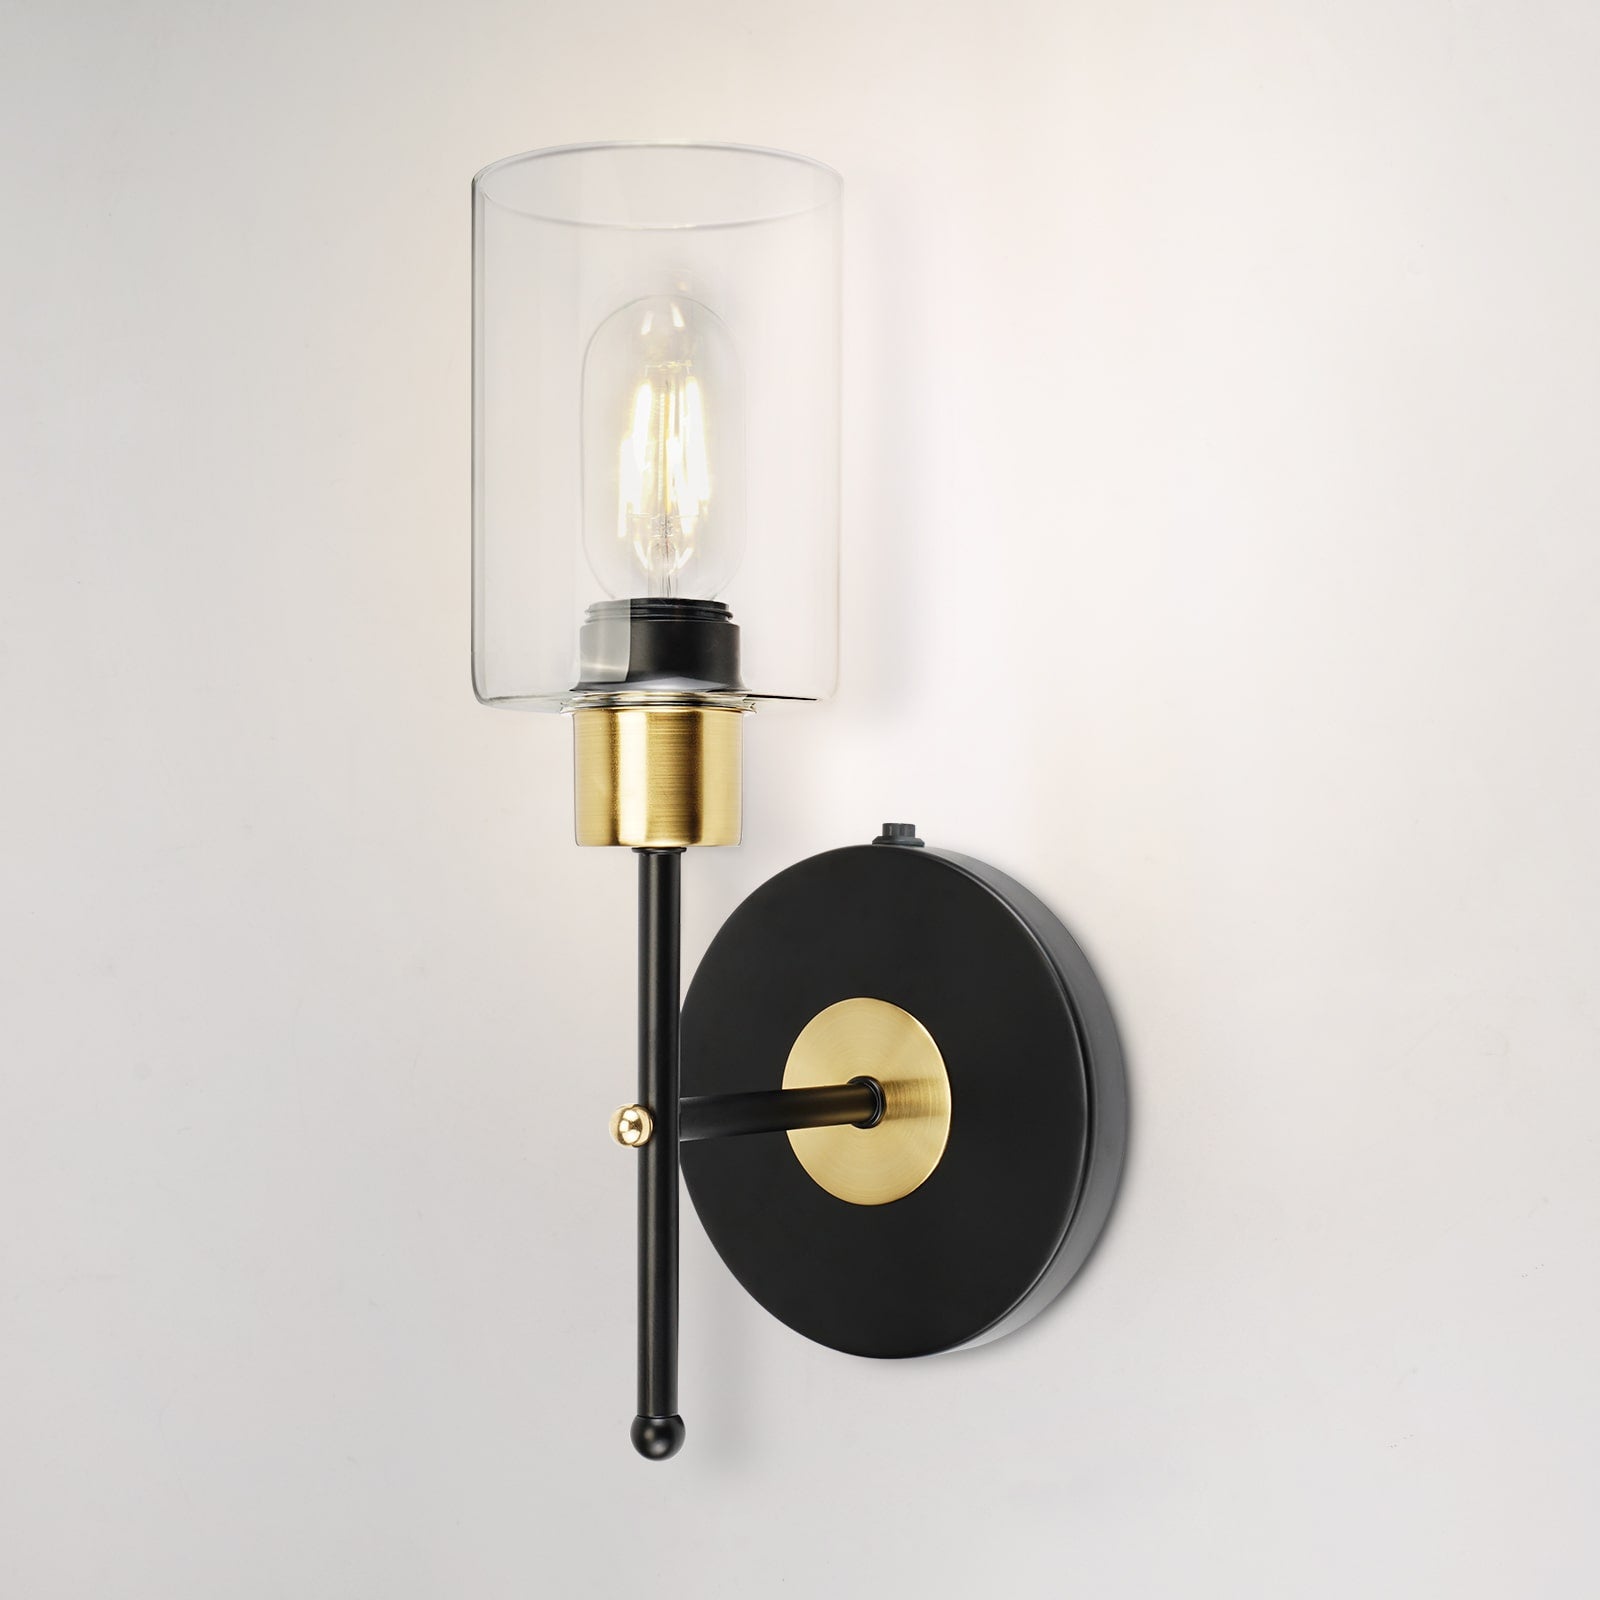 C01 Glass Shade Wall Lamp Battery Powered for Bedroom